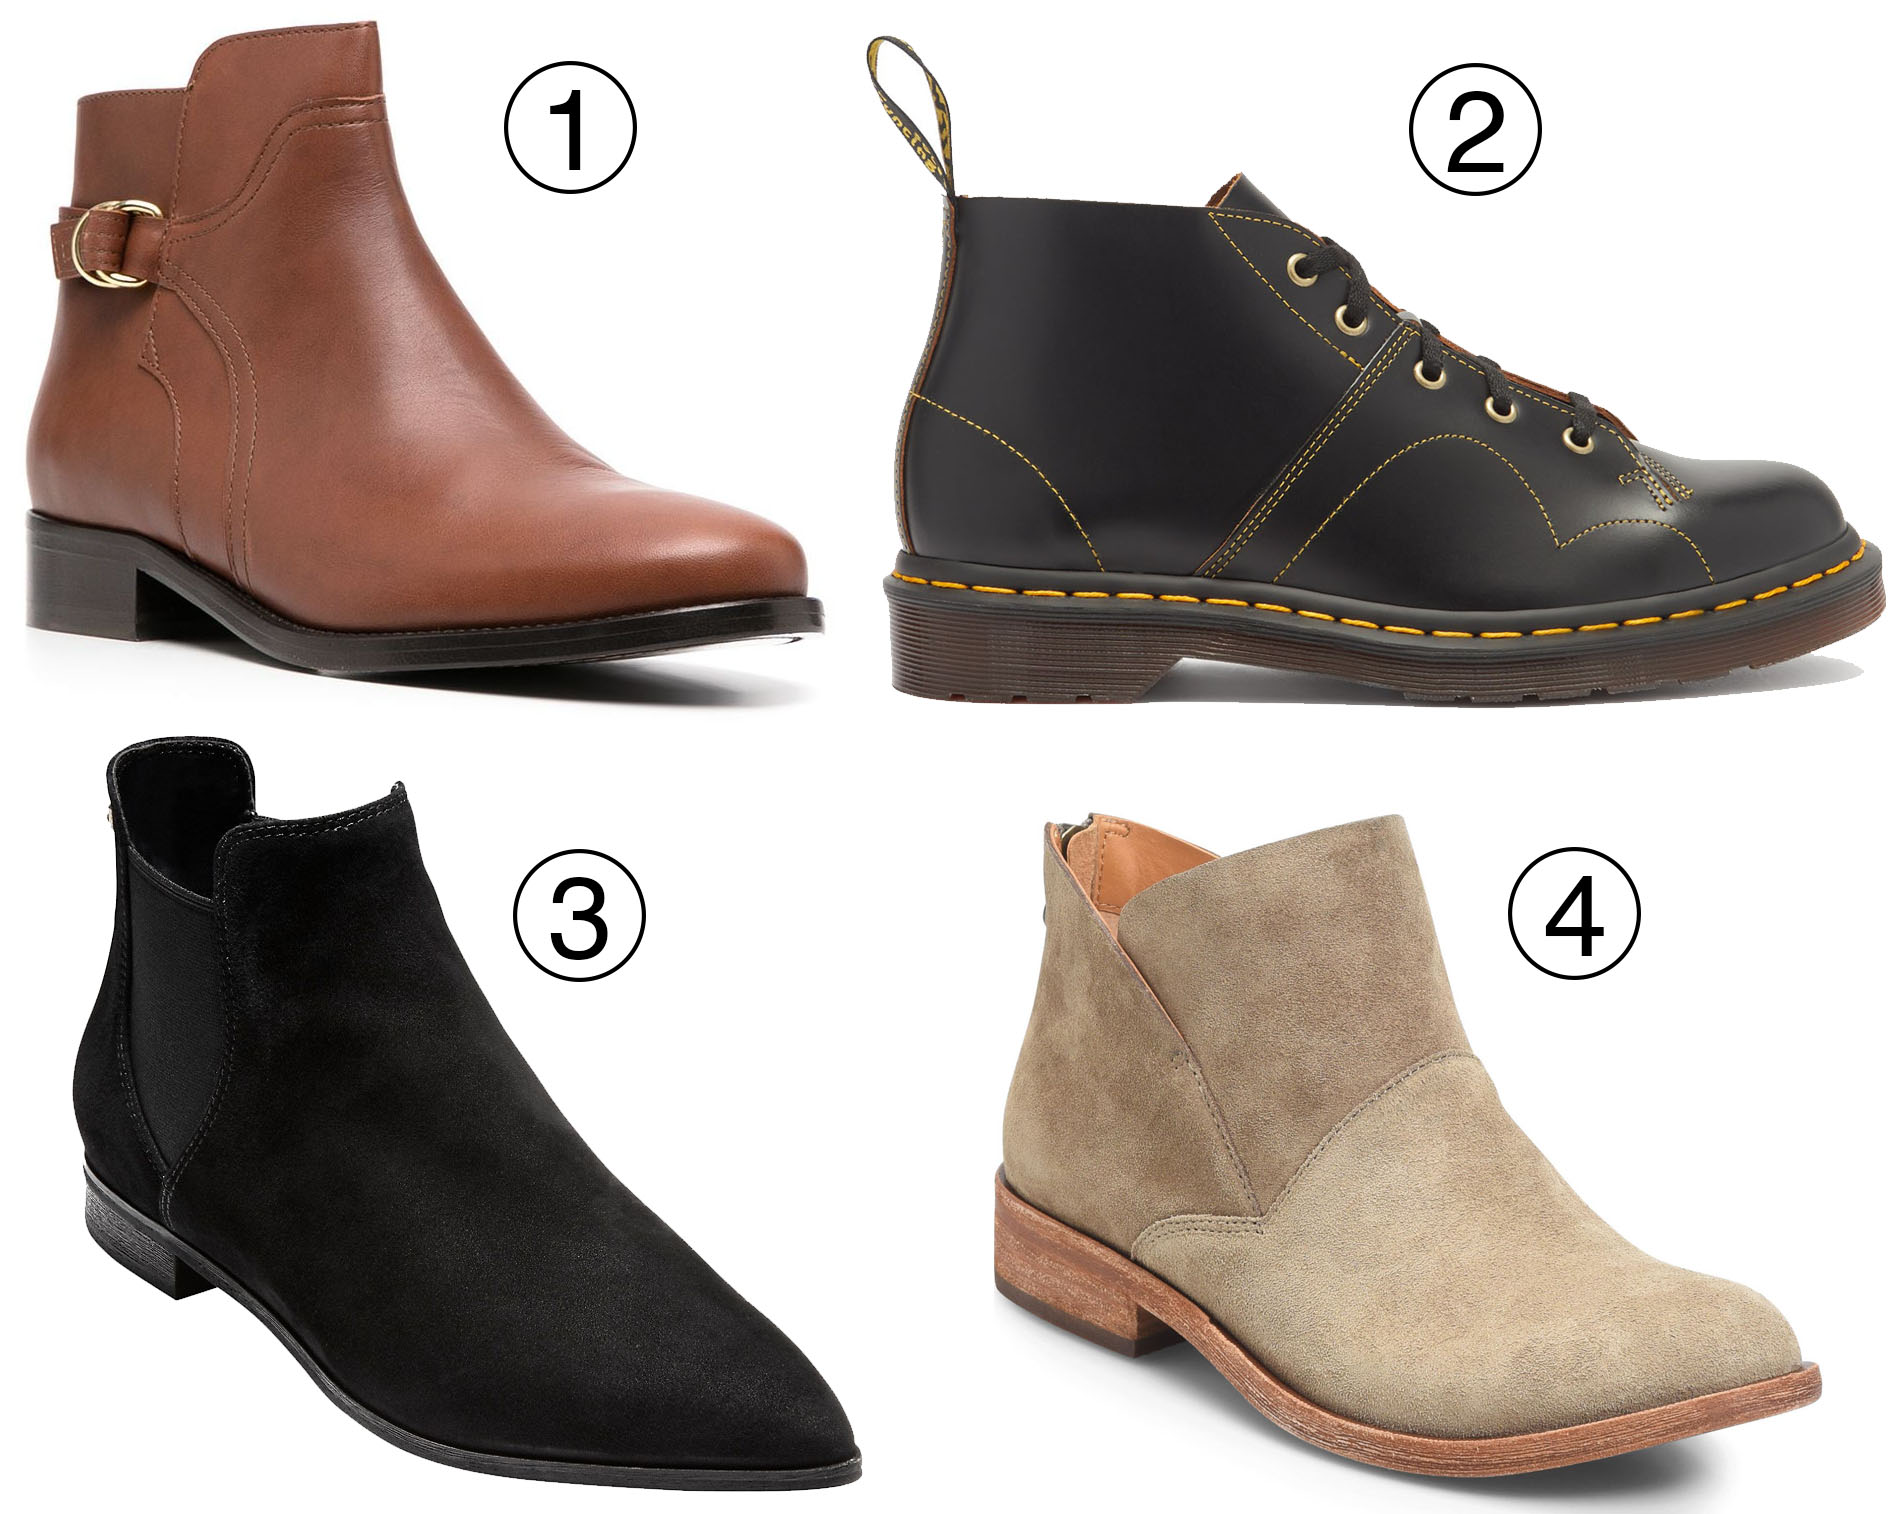 1. Tila March Chelsea ankle boots; 2. Dr. Martens Church leather Monkey boots; 3. Cole Haan Harlyn Suede ankle boots; Kork-Ease Ryder ankle boot